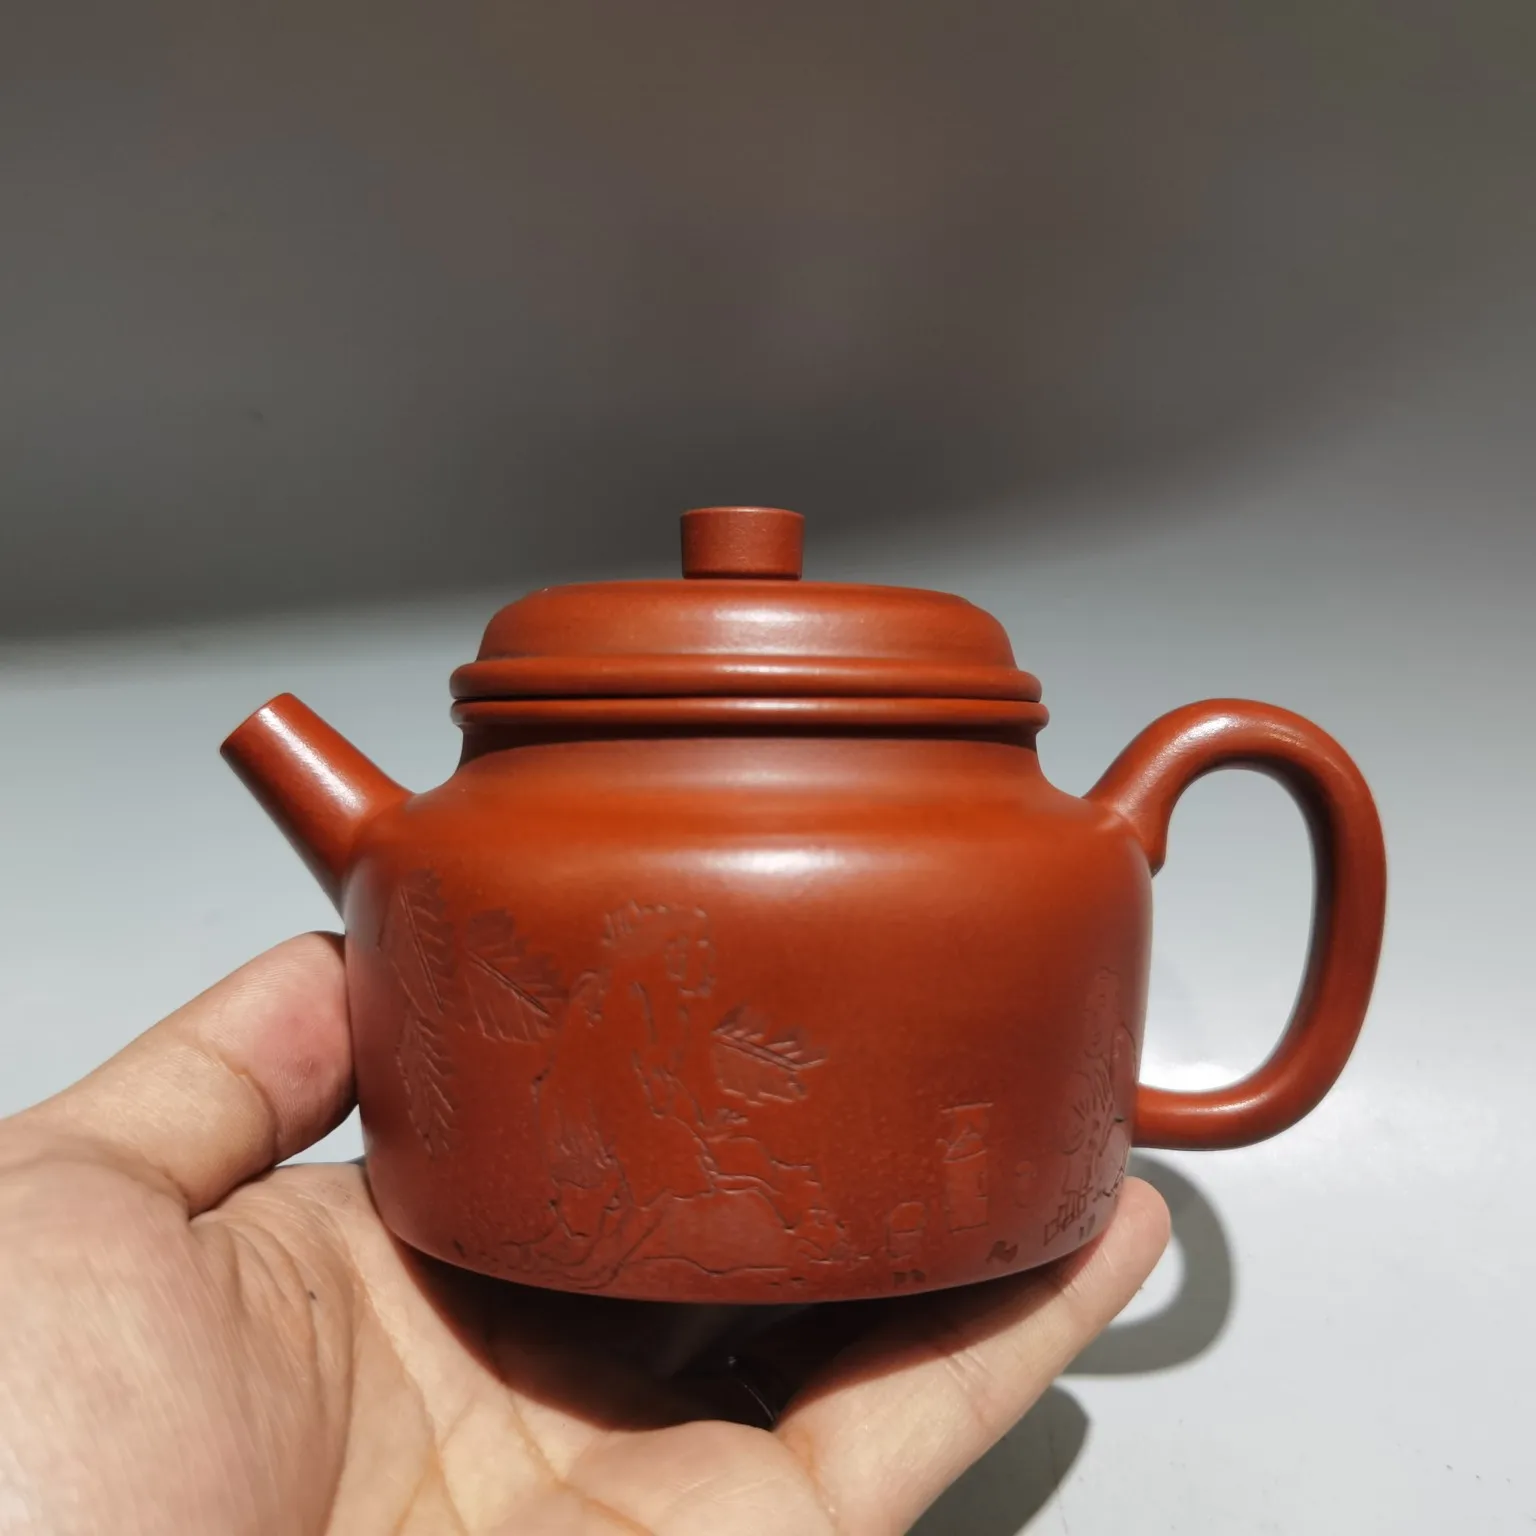 

The Purple Clay Teapot is Finely Crafted and Has A Beautiful Appearance Making It A Home Craft Worth Collecting and Decorating